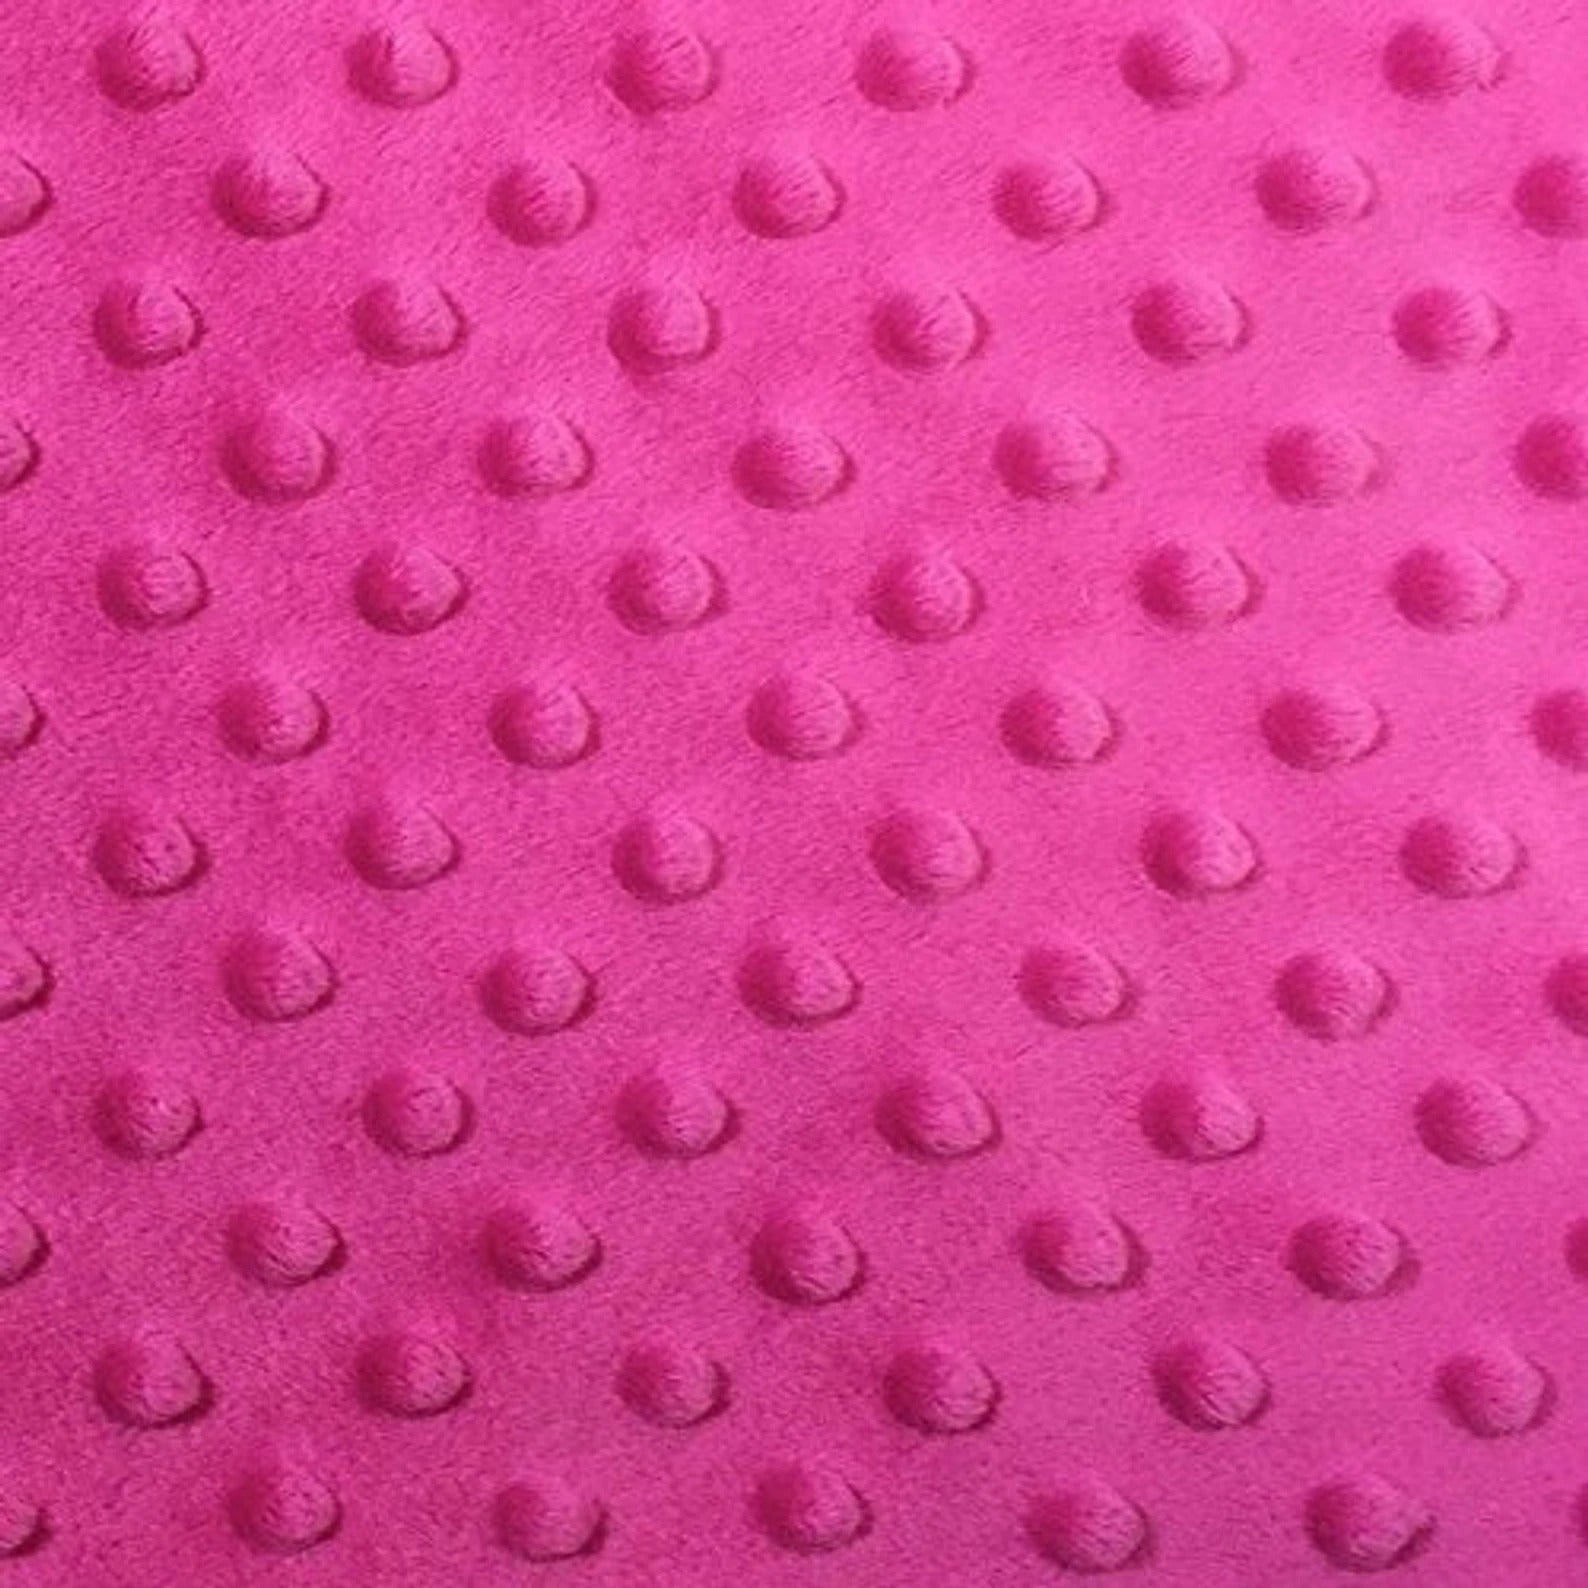 Dimple Dot Minky Fabric Sold By The Yard - 36"/ 58" Hot Pink